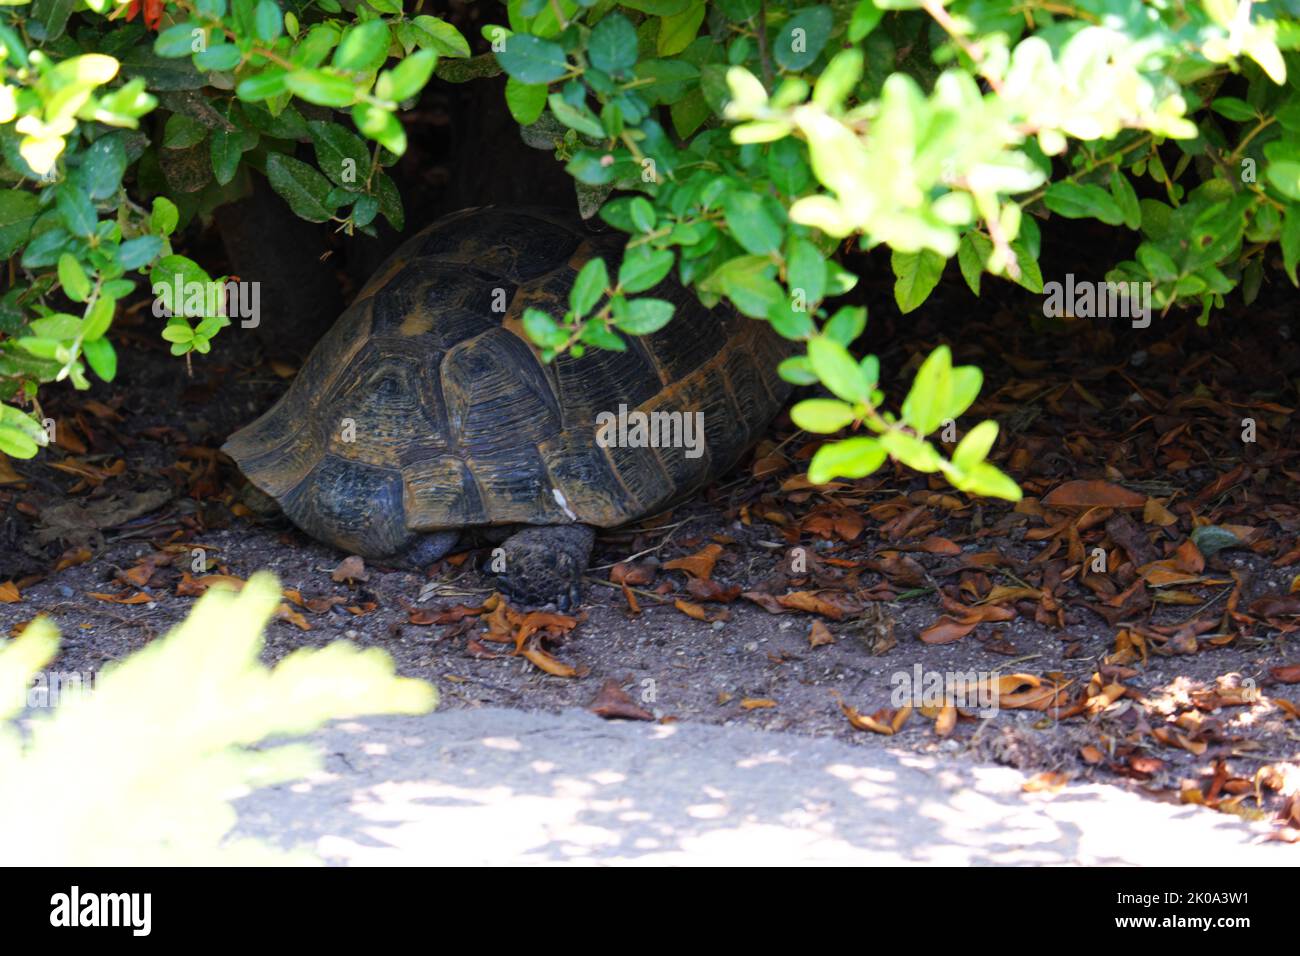 European land turtle hiding in shadow of a tree in a sunny day Stock Photo